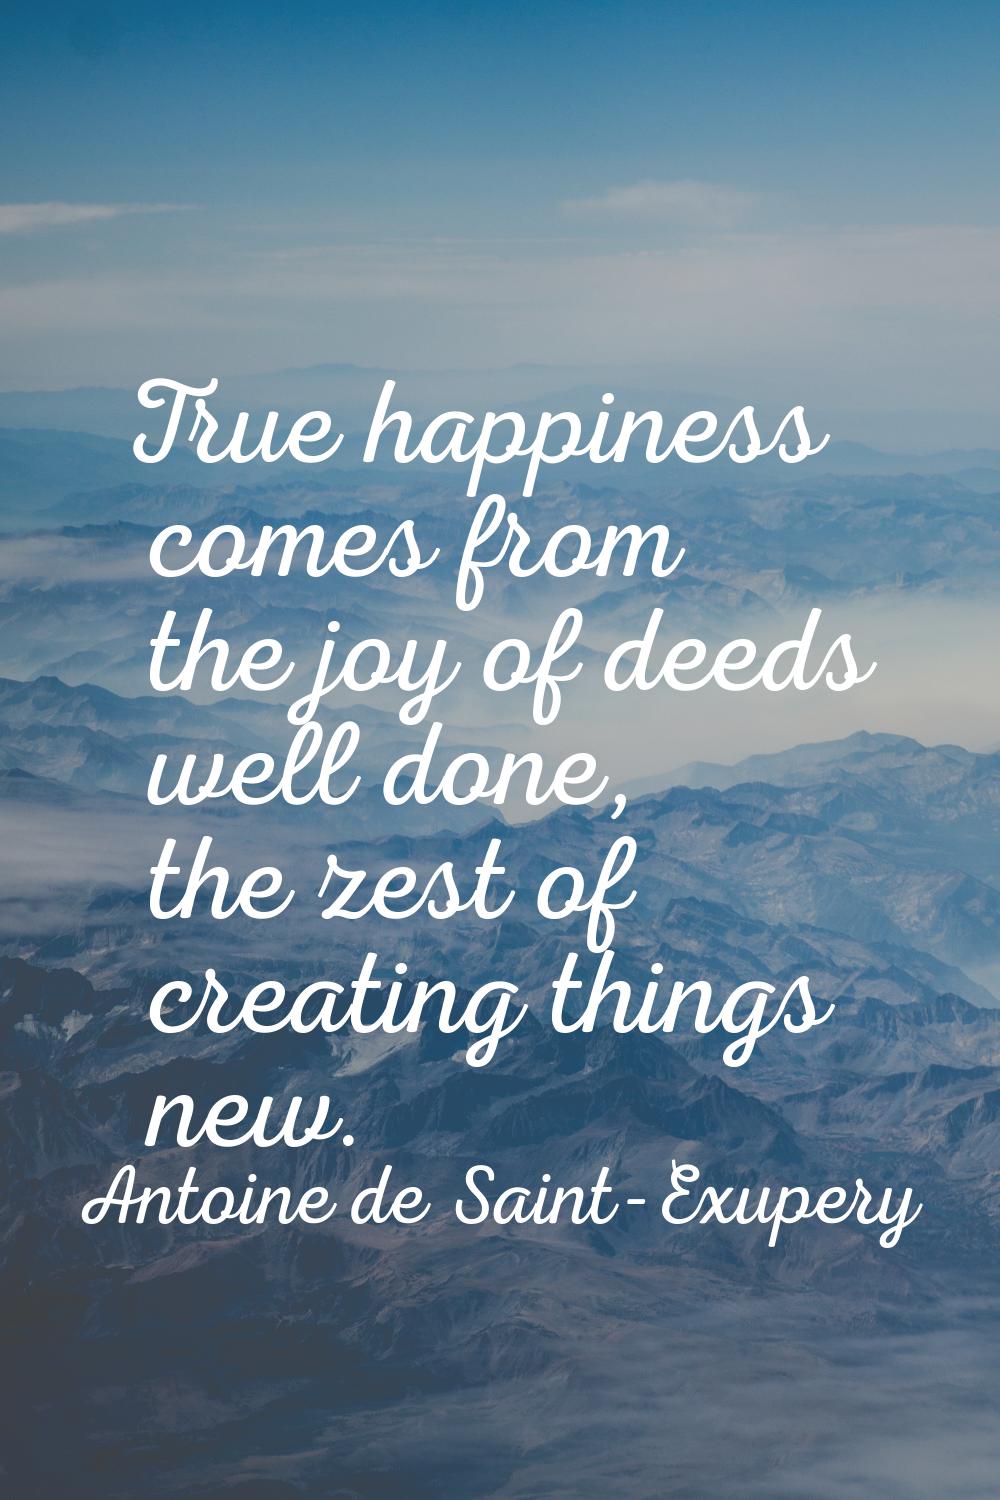 True happiness comes from the joy of deeds well done, the zest of creating things new.